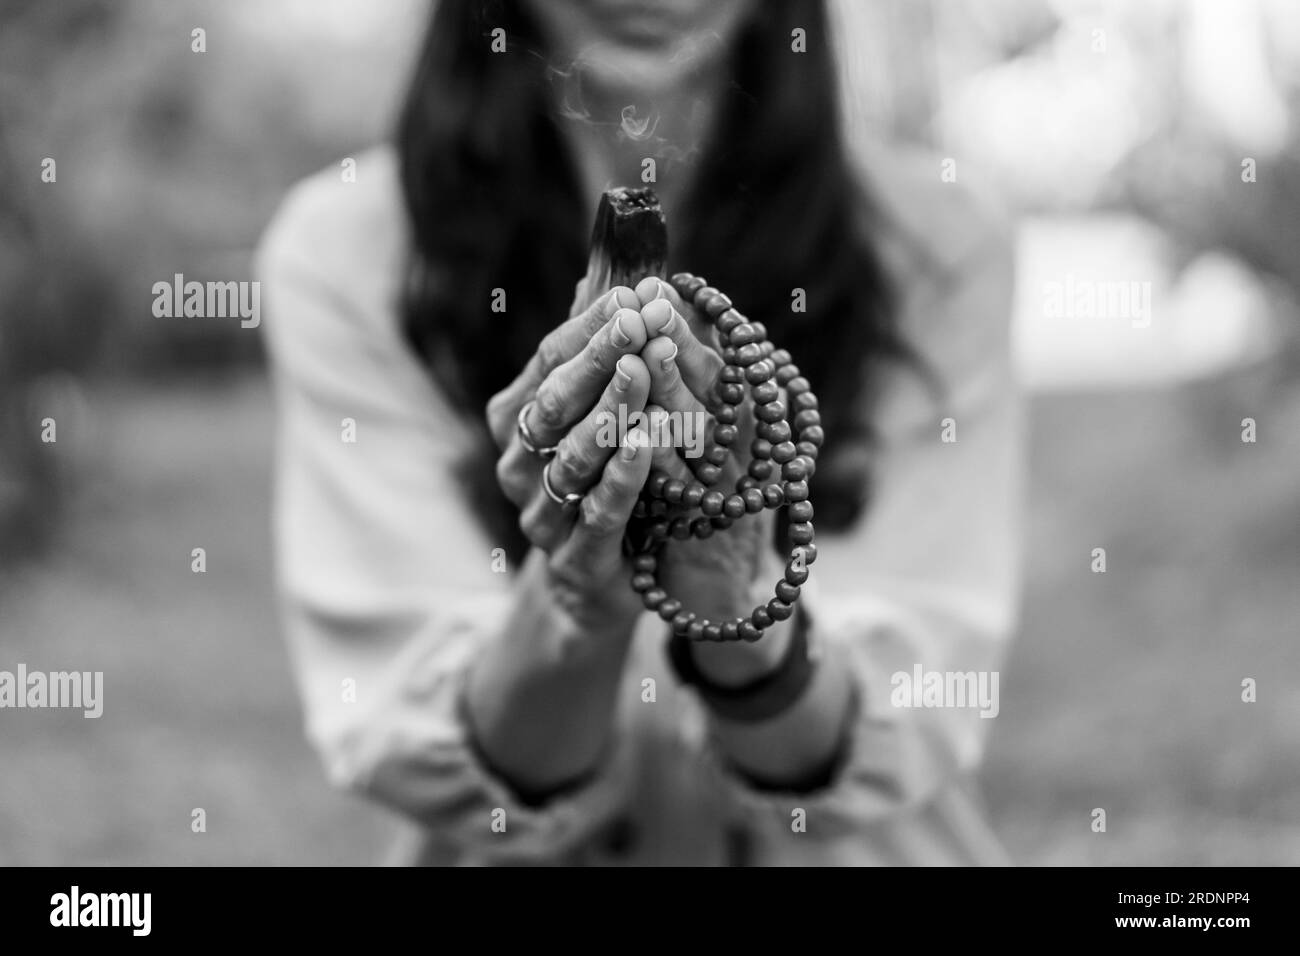 Close-up of a japa mala and a burning palo santo or holy sacred tree stick held by a woman. Stock Photo